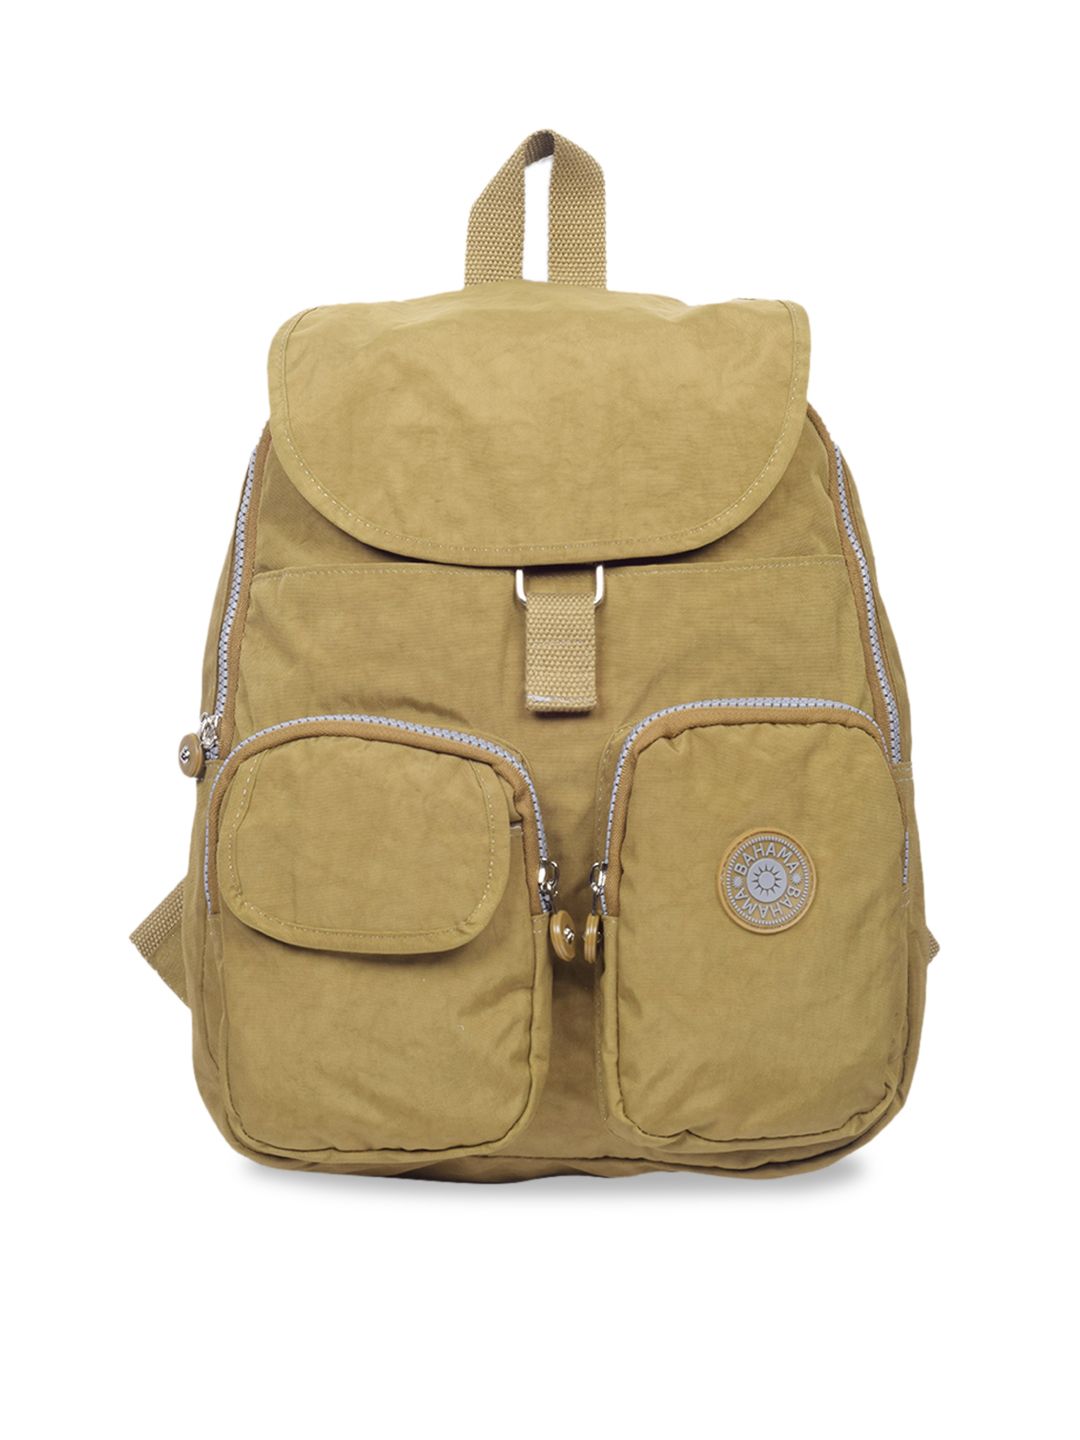 BAHAMA Crinkle Unisex Yellow Solid Backpack Price in India